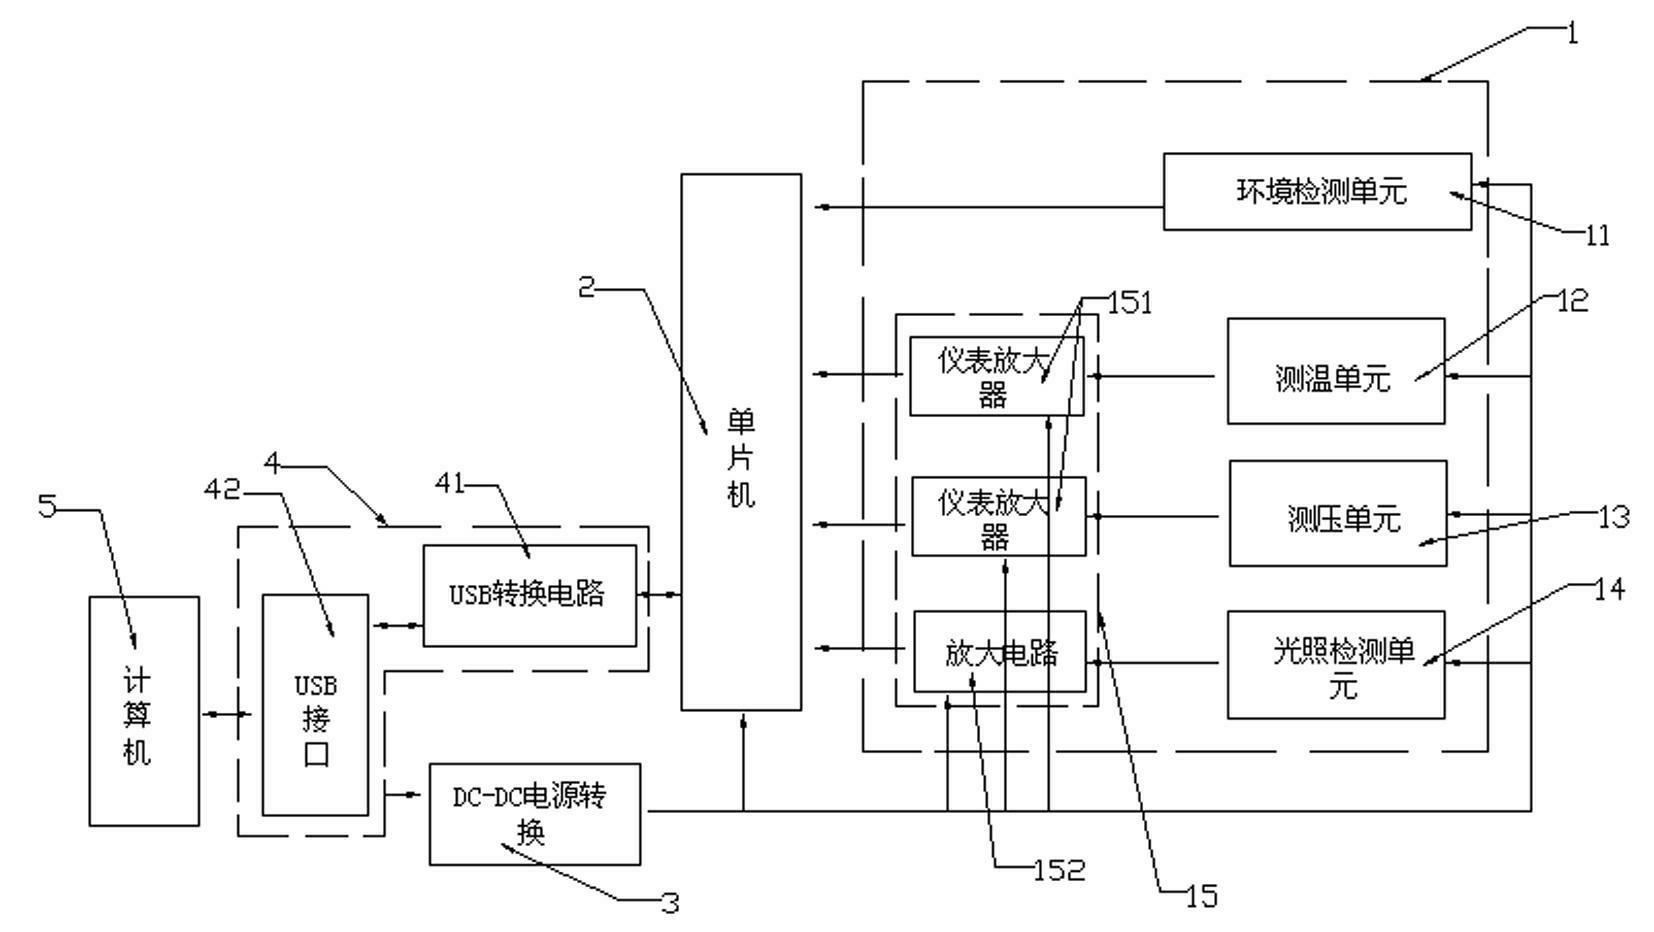 Detection apparatus for pressure inside plant body